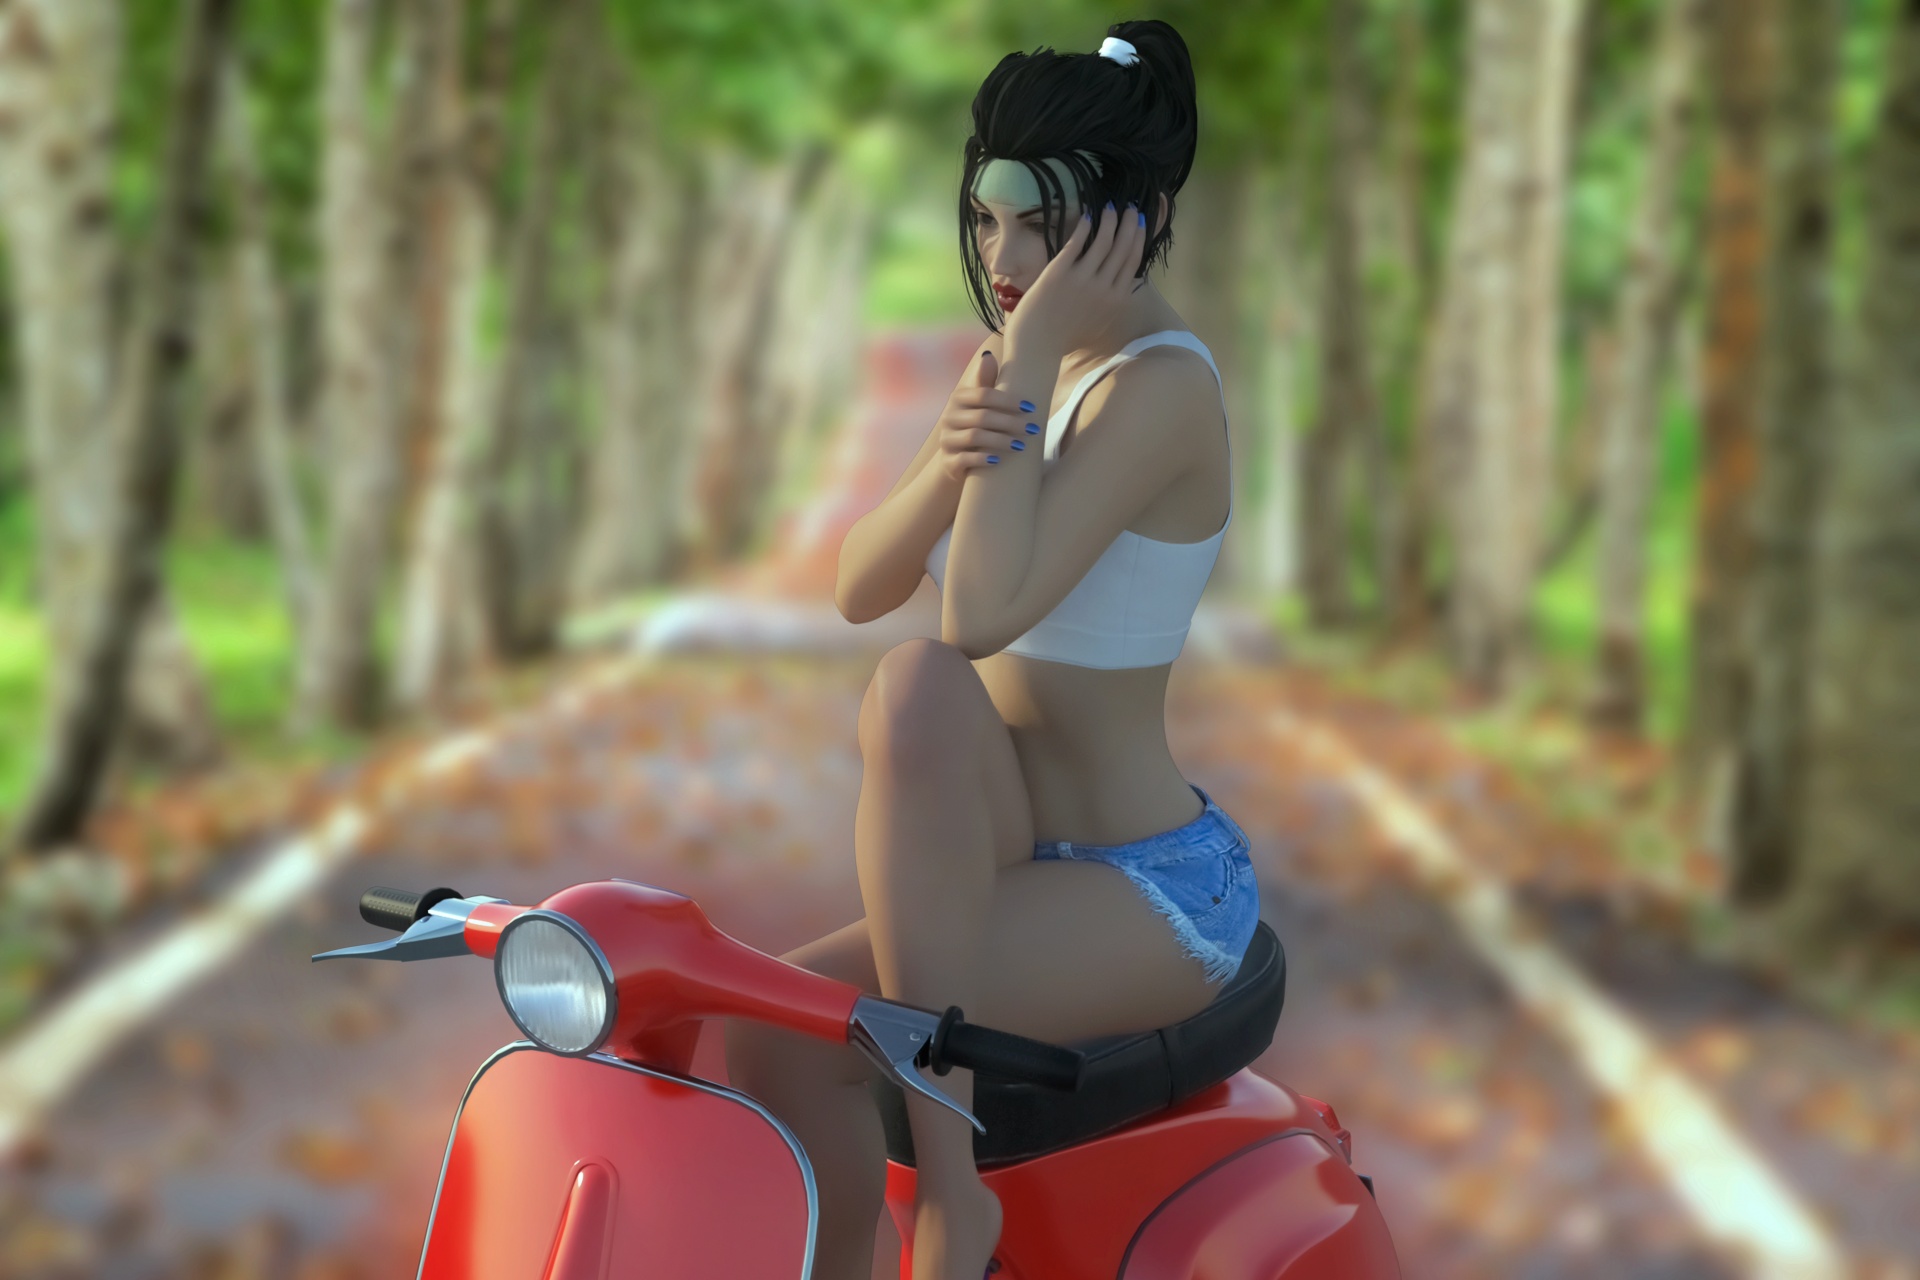 Woman On Scooter